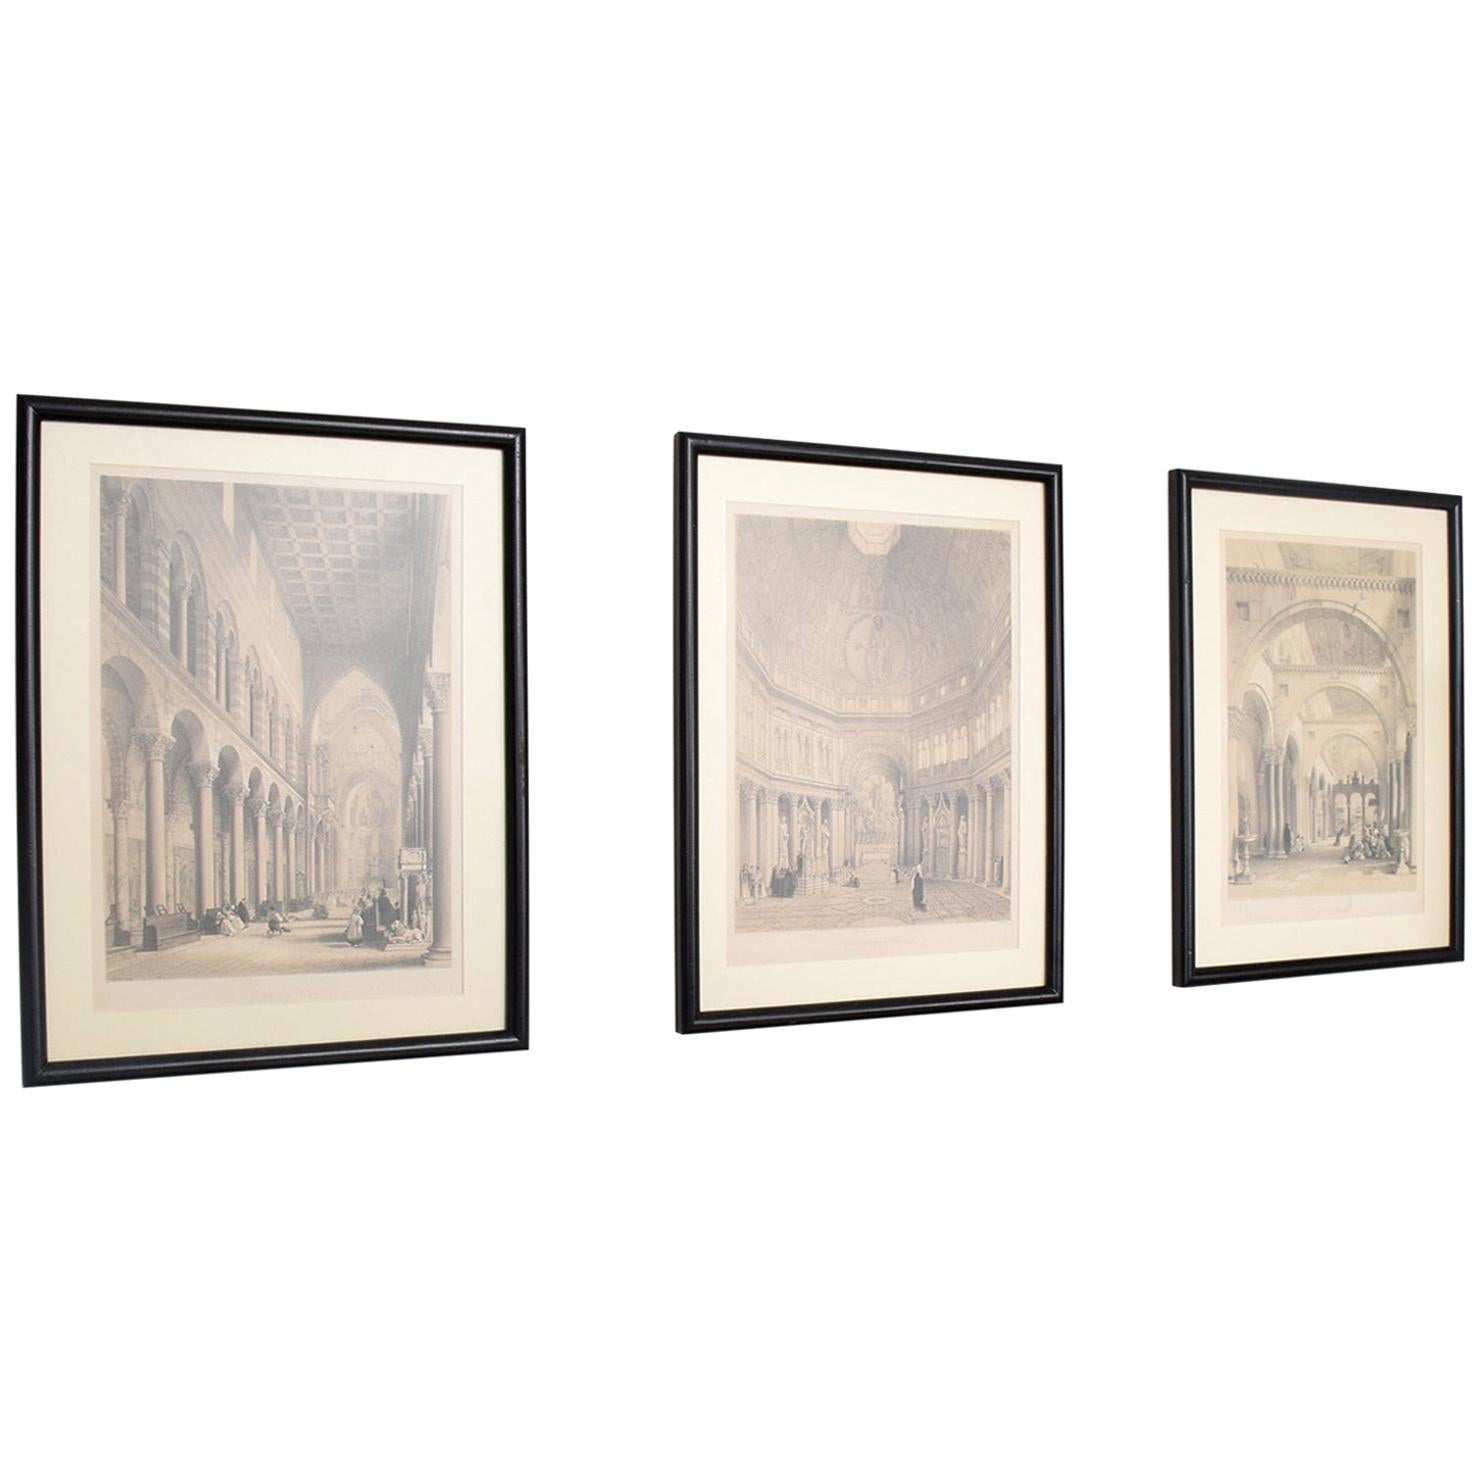 1960s Mid-Century Modern Italian Column Architecture Etchings Framed - Set of 3 For Sale